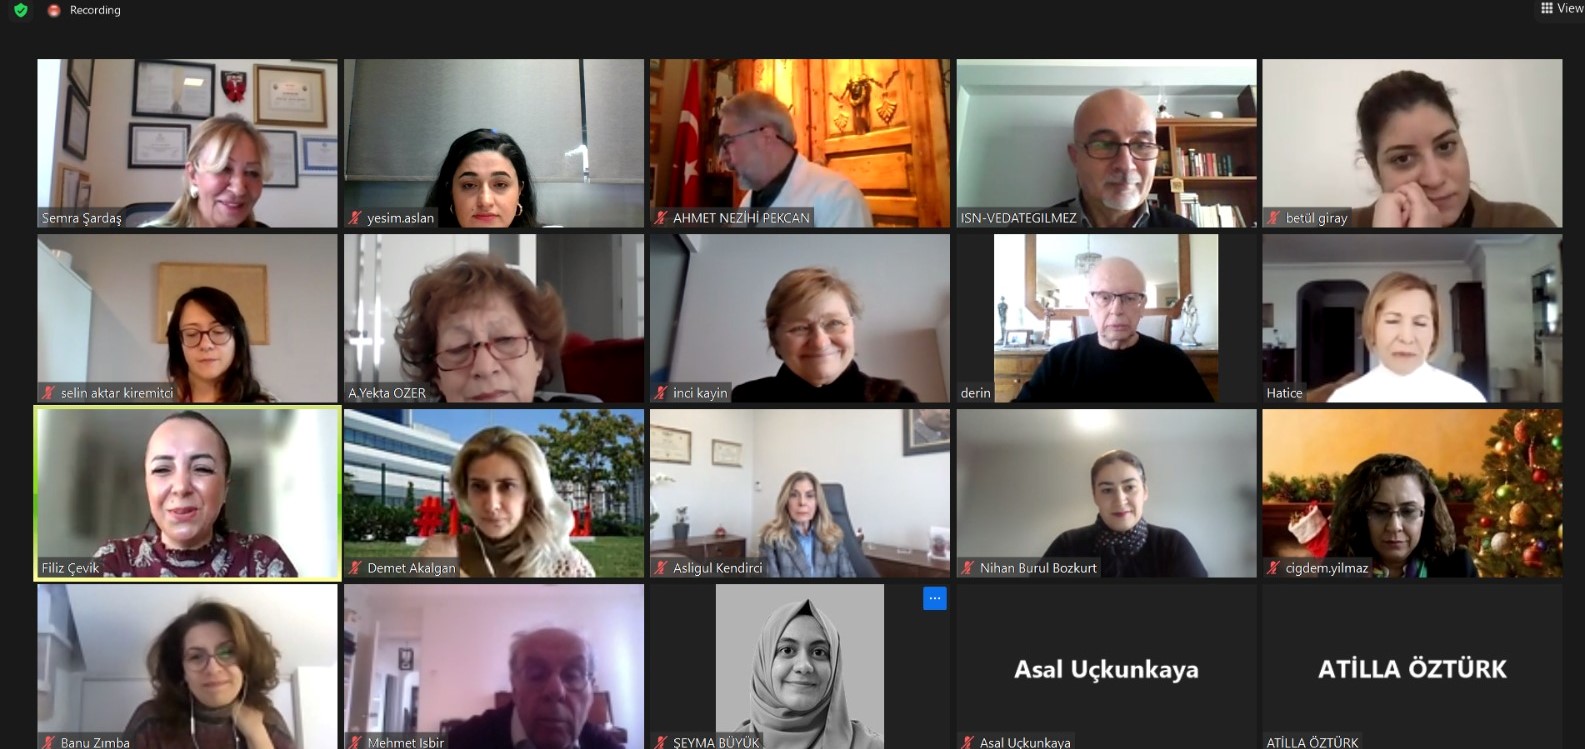  Our Academic Advisory Board meeting was held online.